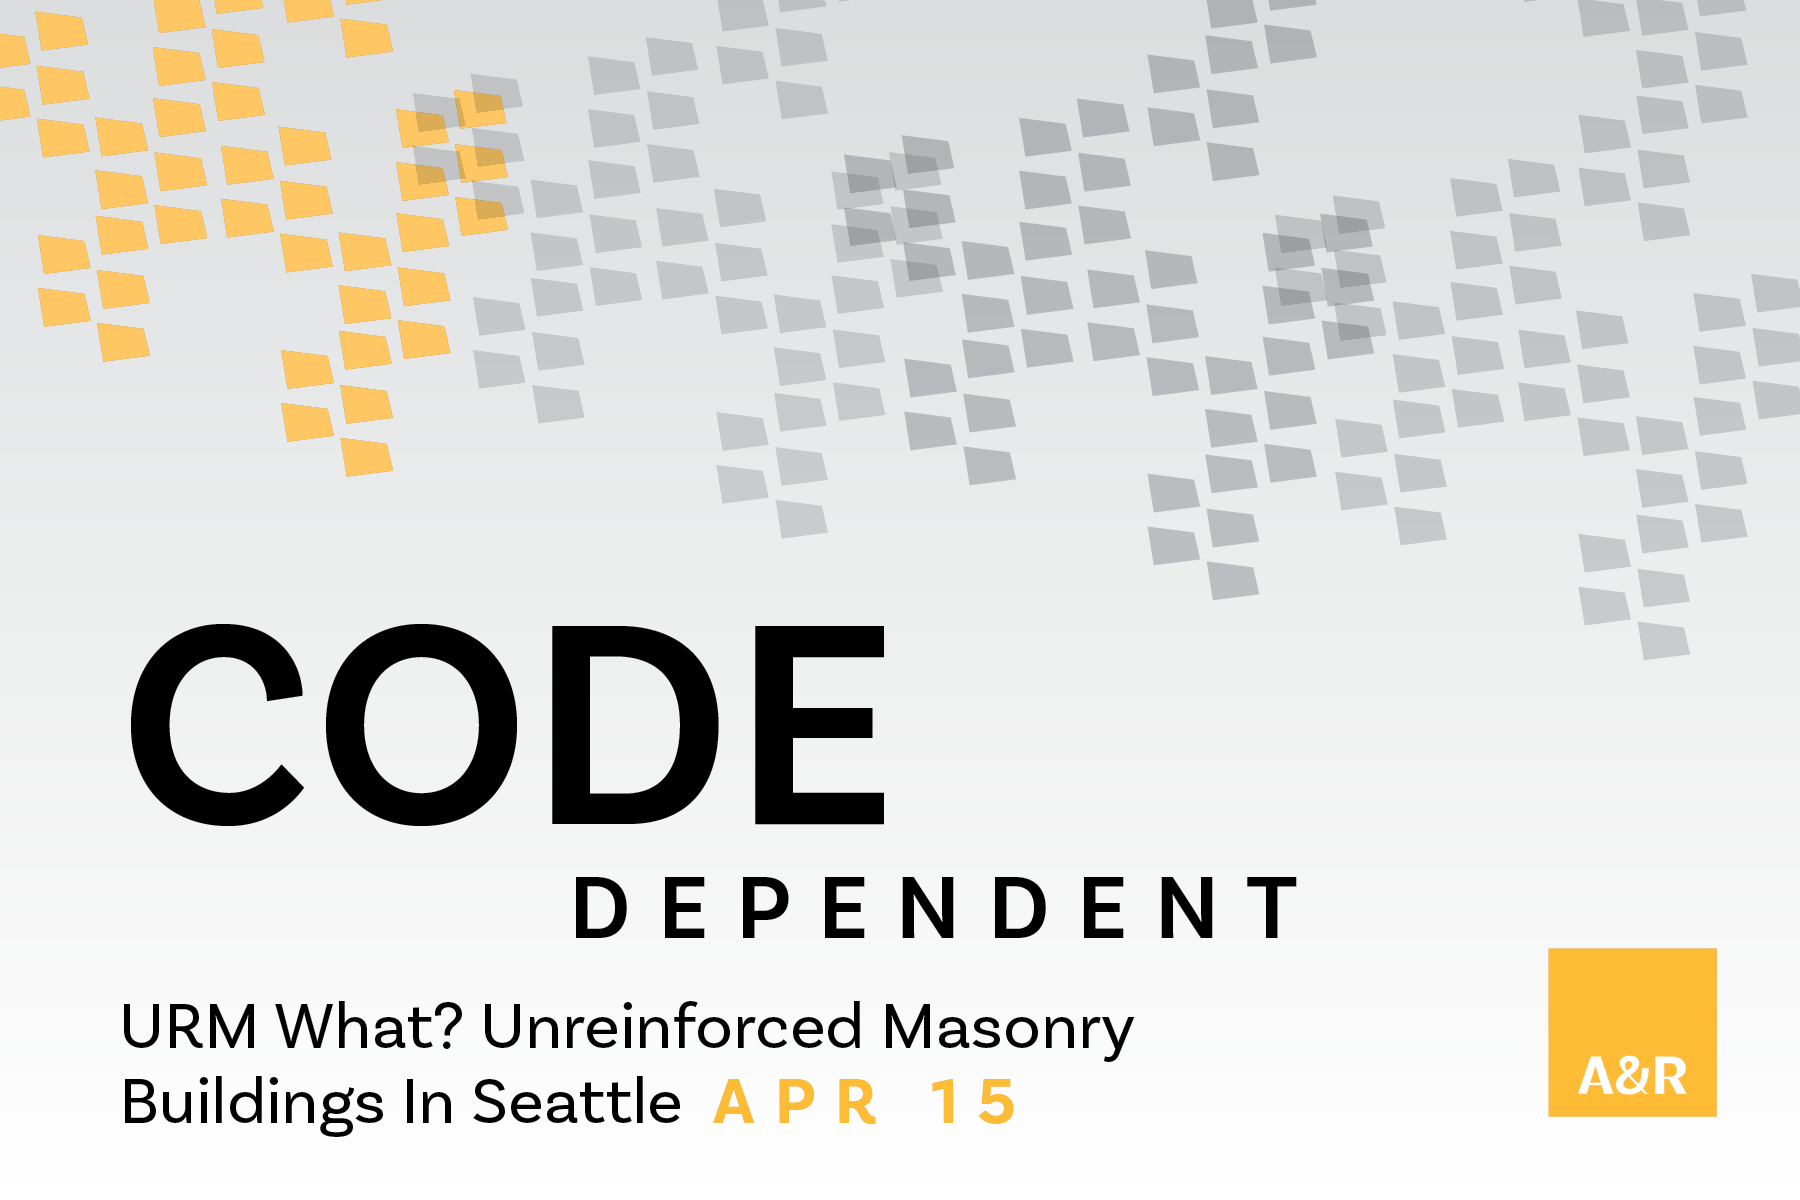 This page is intended only for participants of 2019 Code Dependent: URM What? Unreinforced Masonry Buildings In Seattle